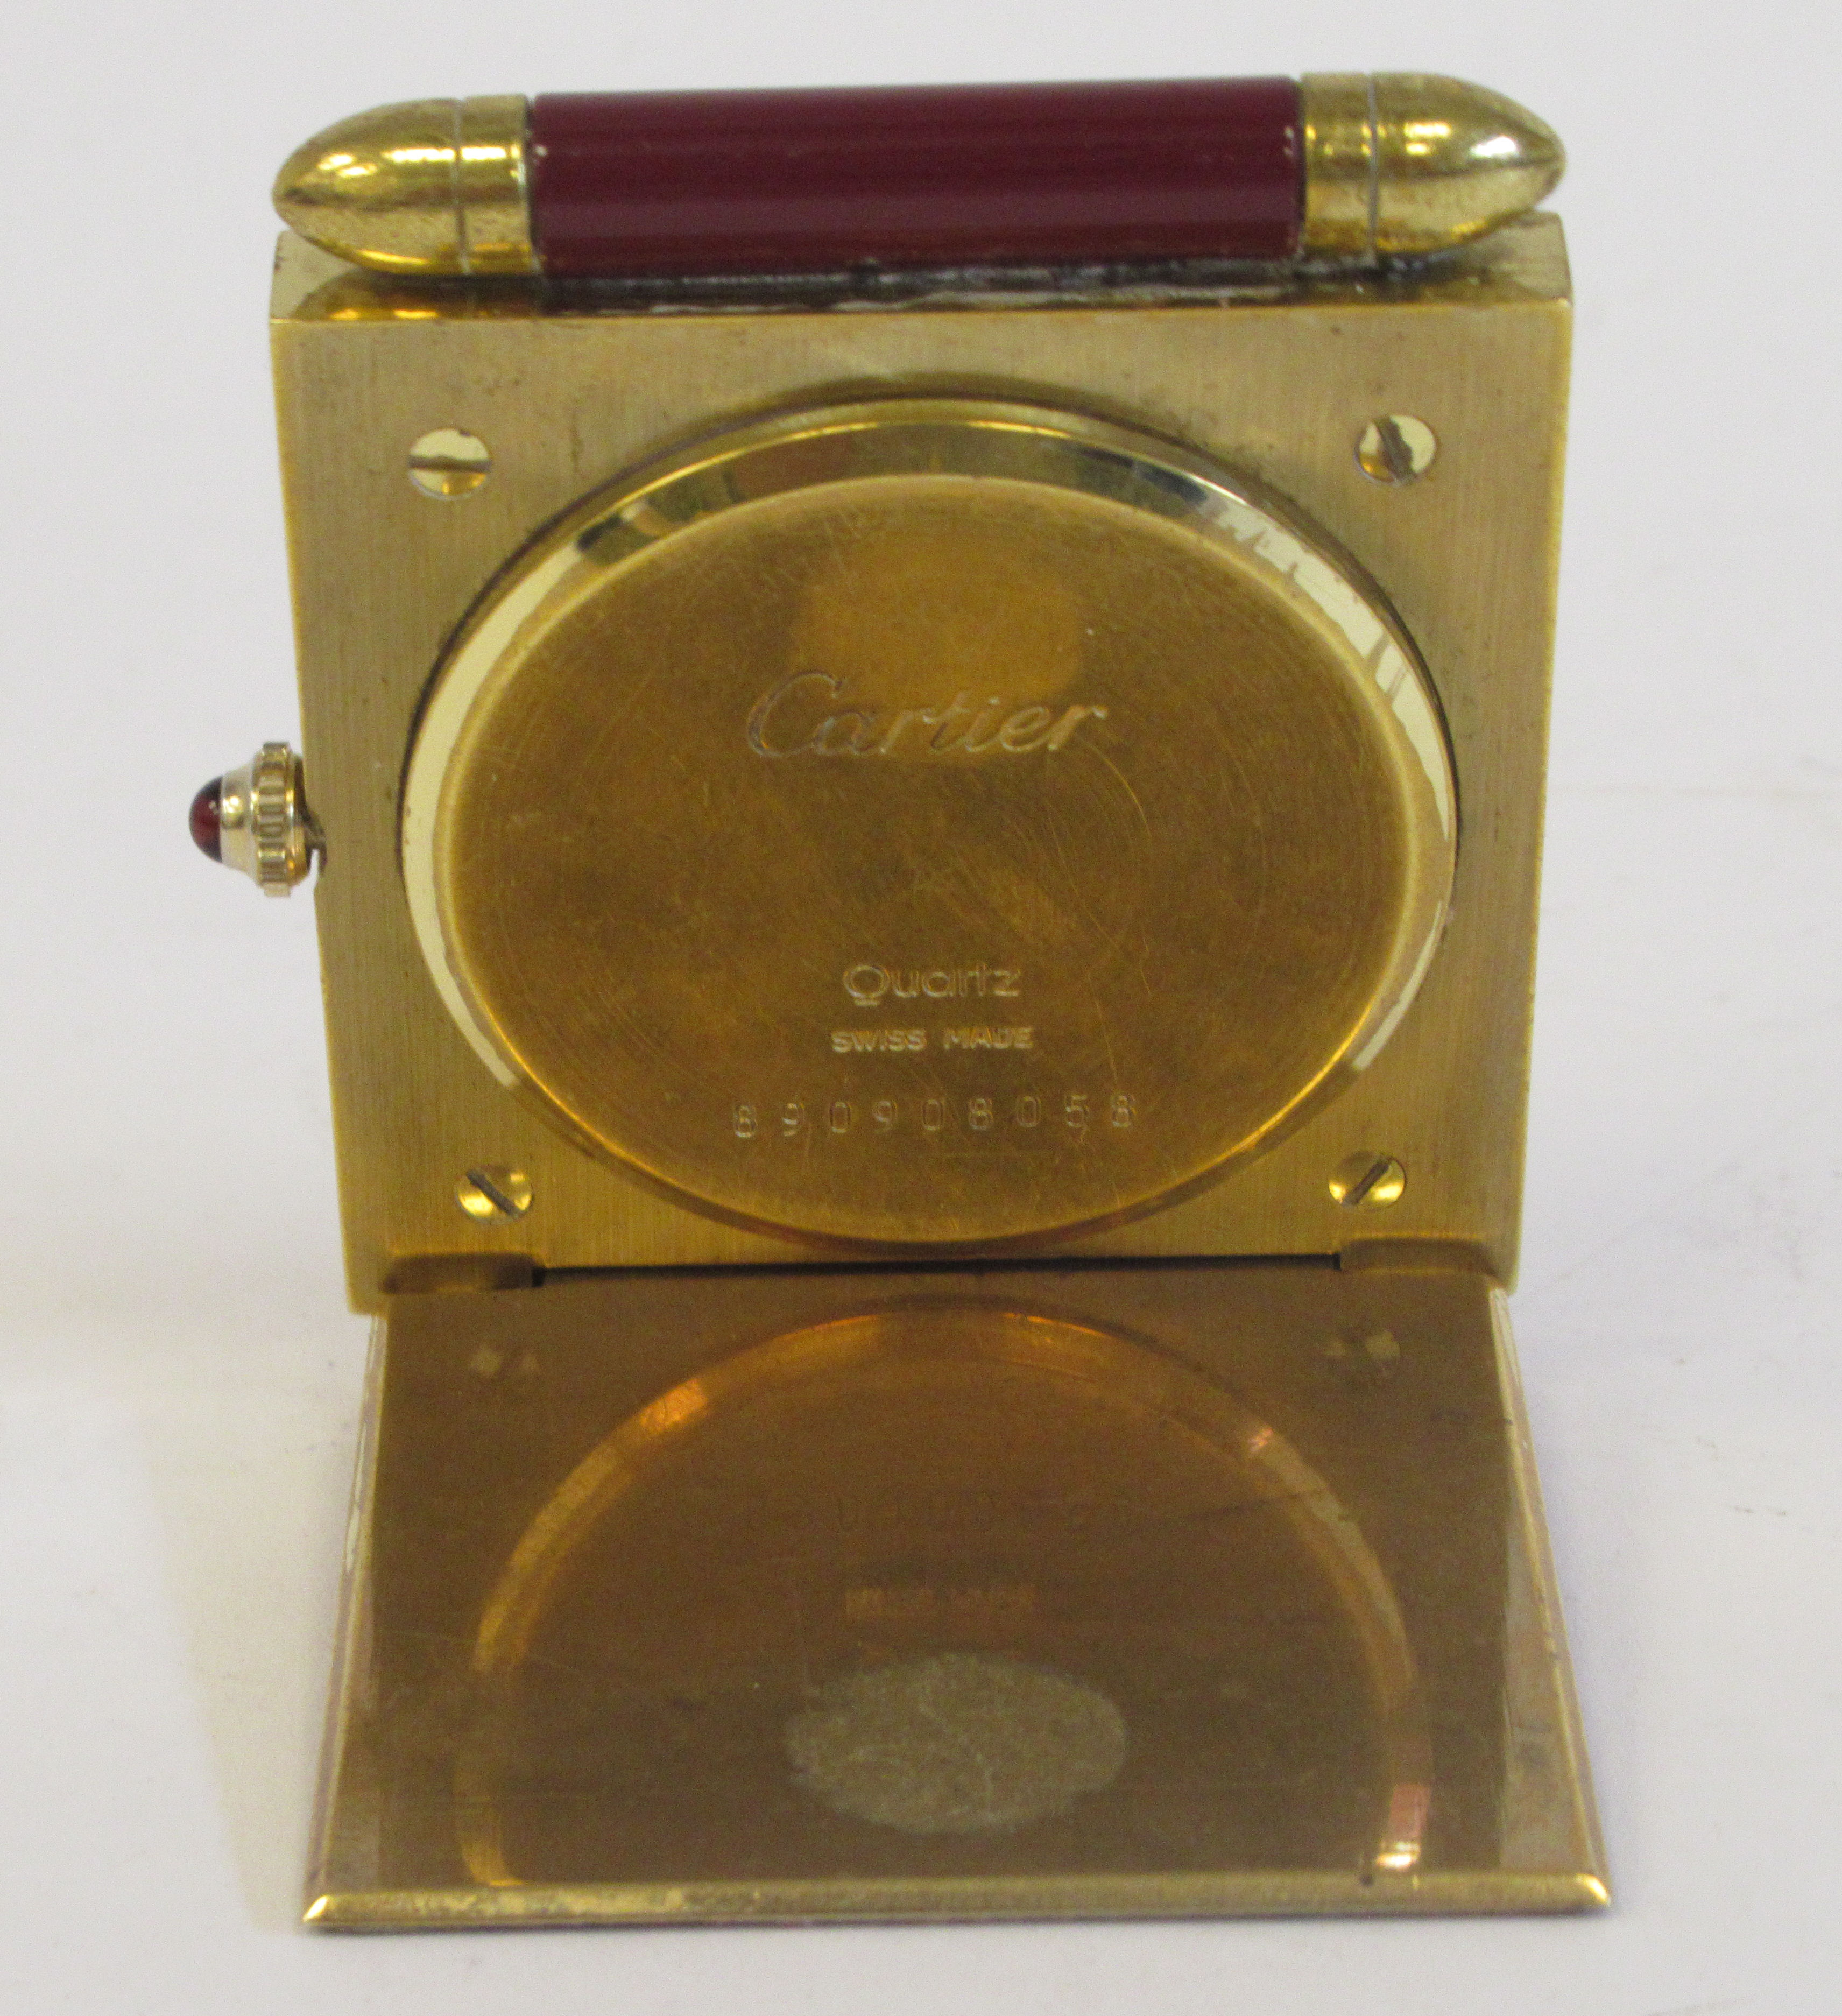 A Cartier Swiss made traveller's lacquered gilt metal cased timepiece of slim, square form with a - Image 3 of 6